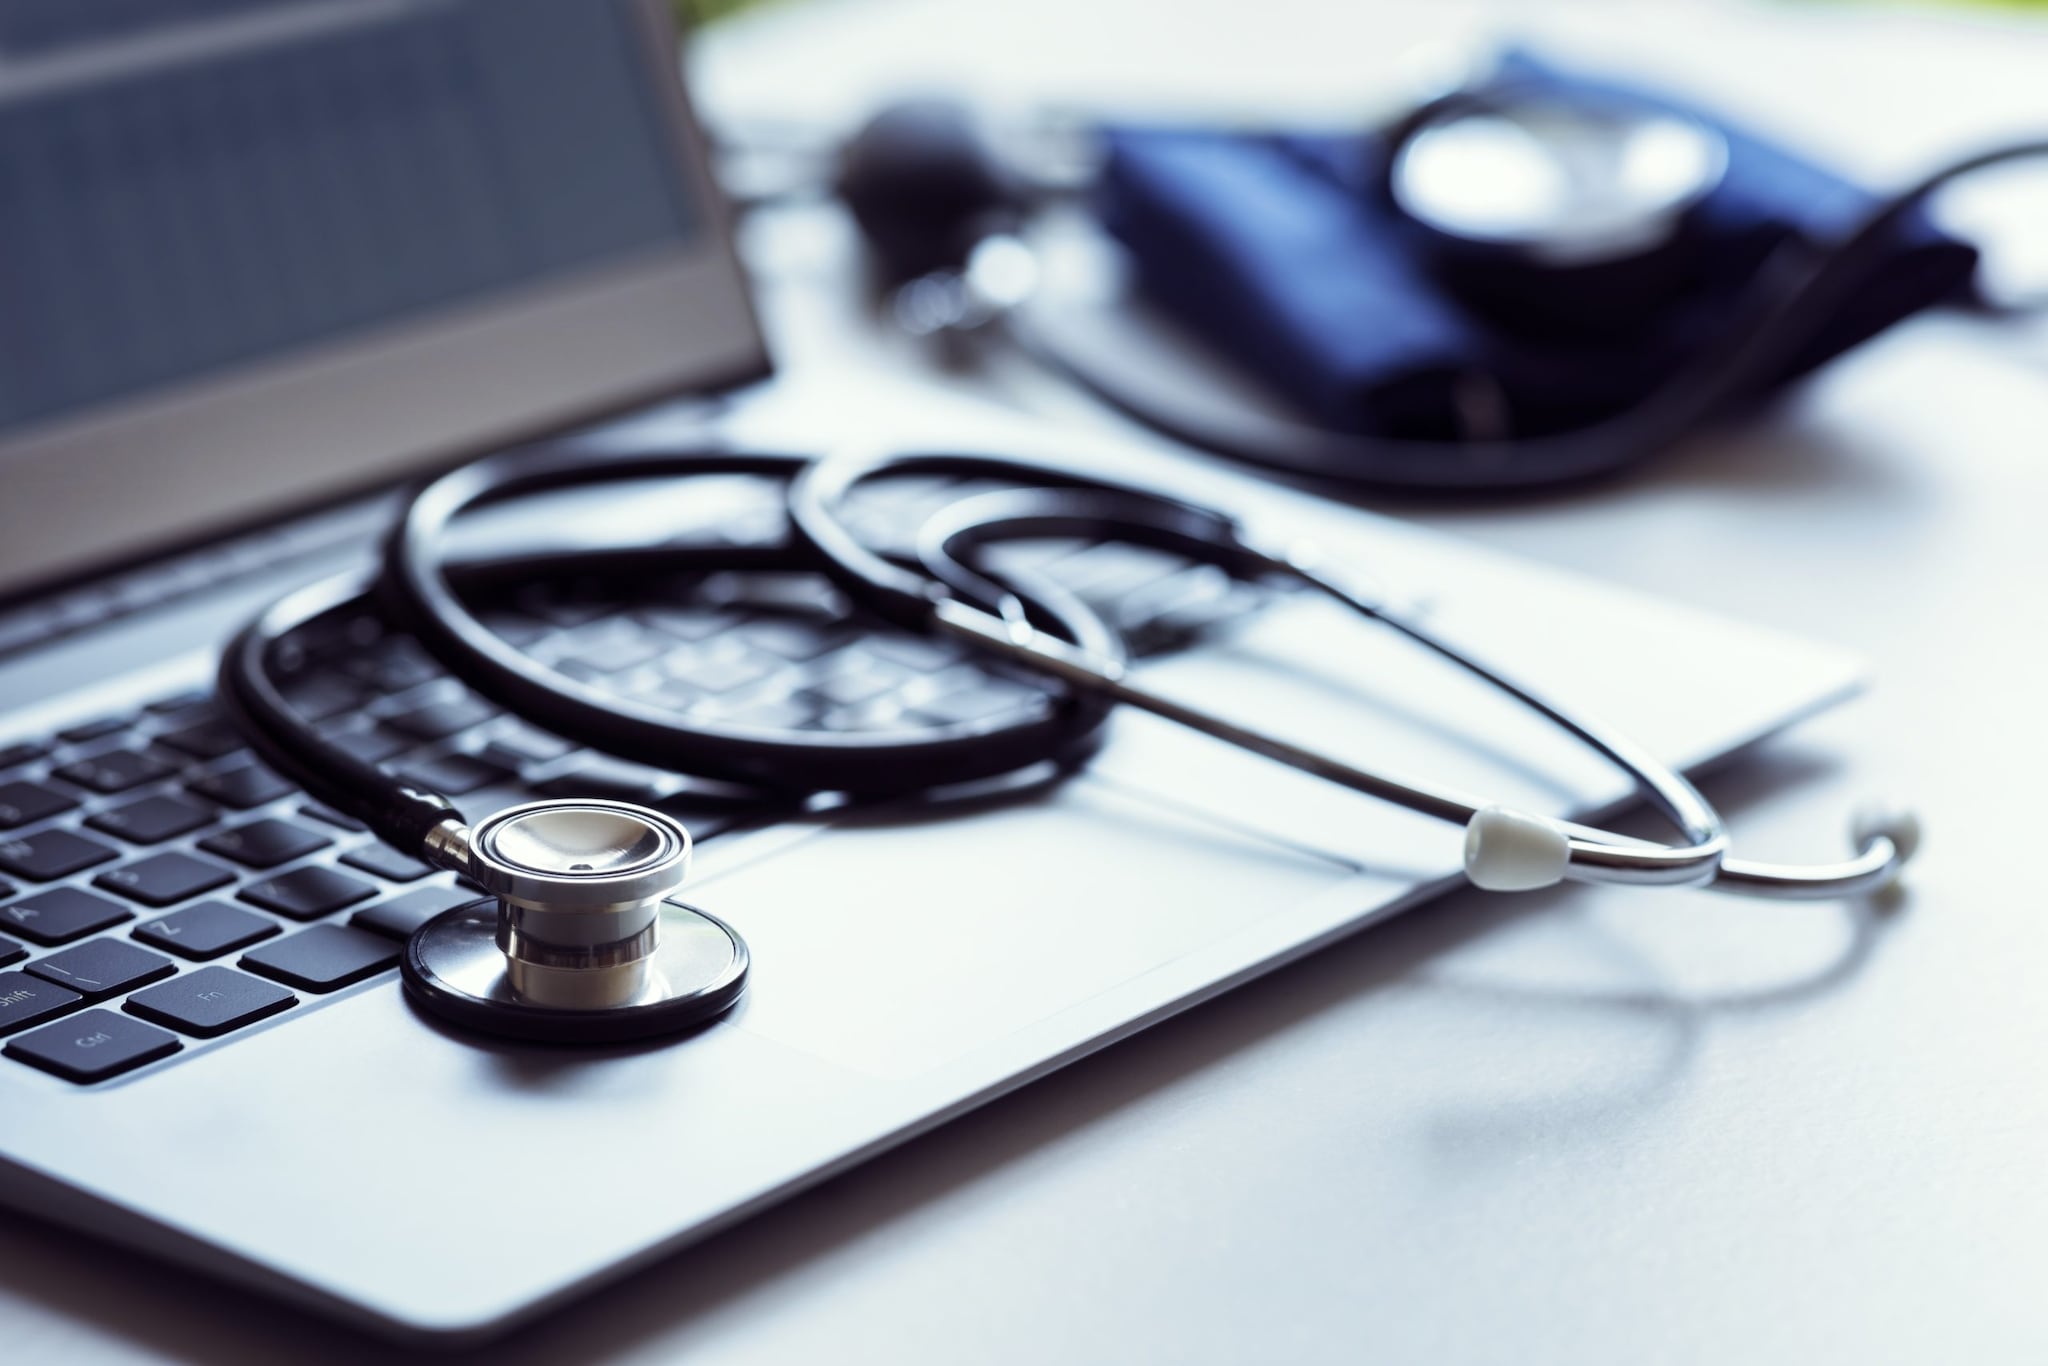 A black stethoscope draped across a laptop keyboard with a blood pressure cuff laying in the background